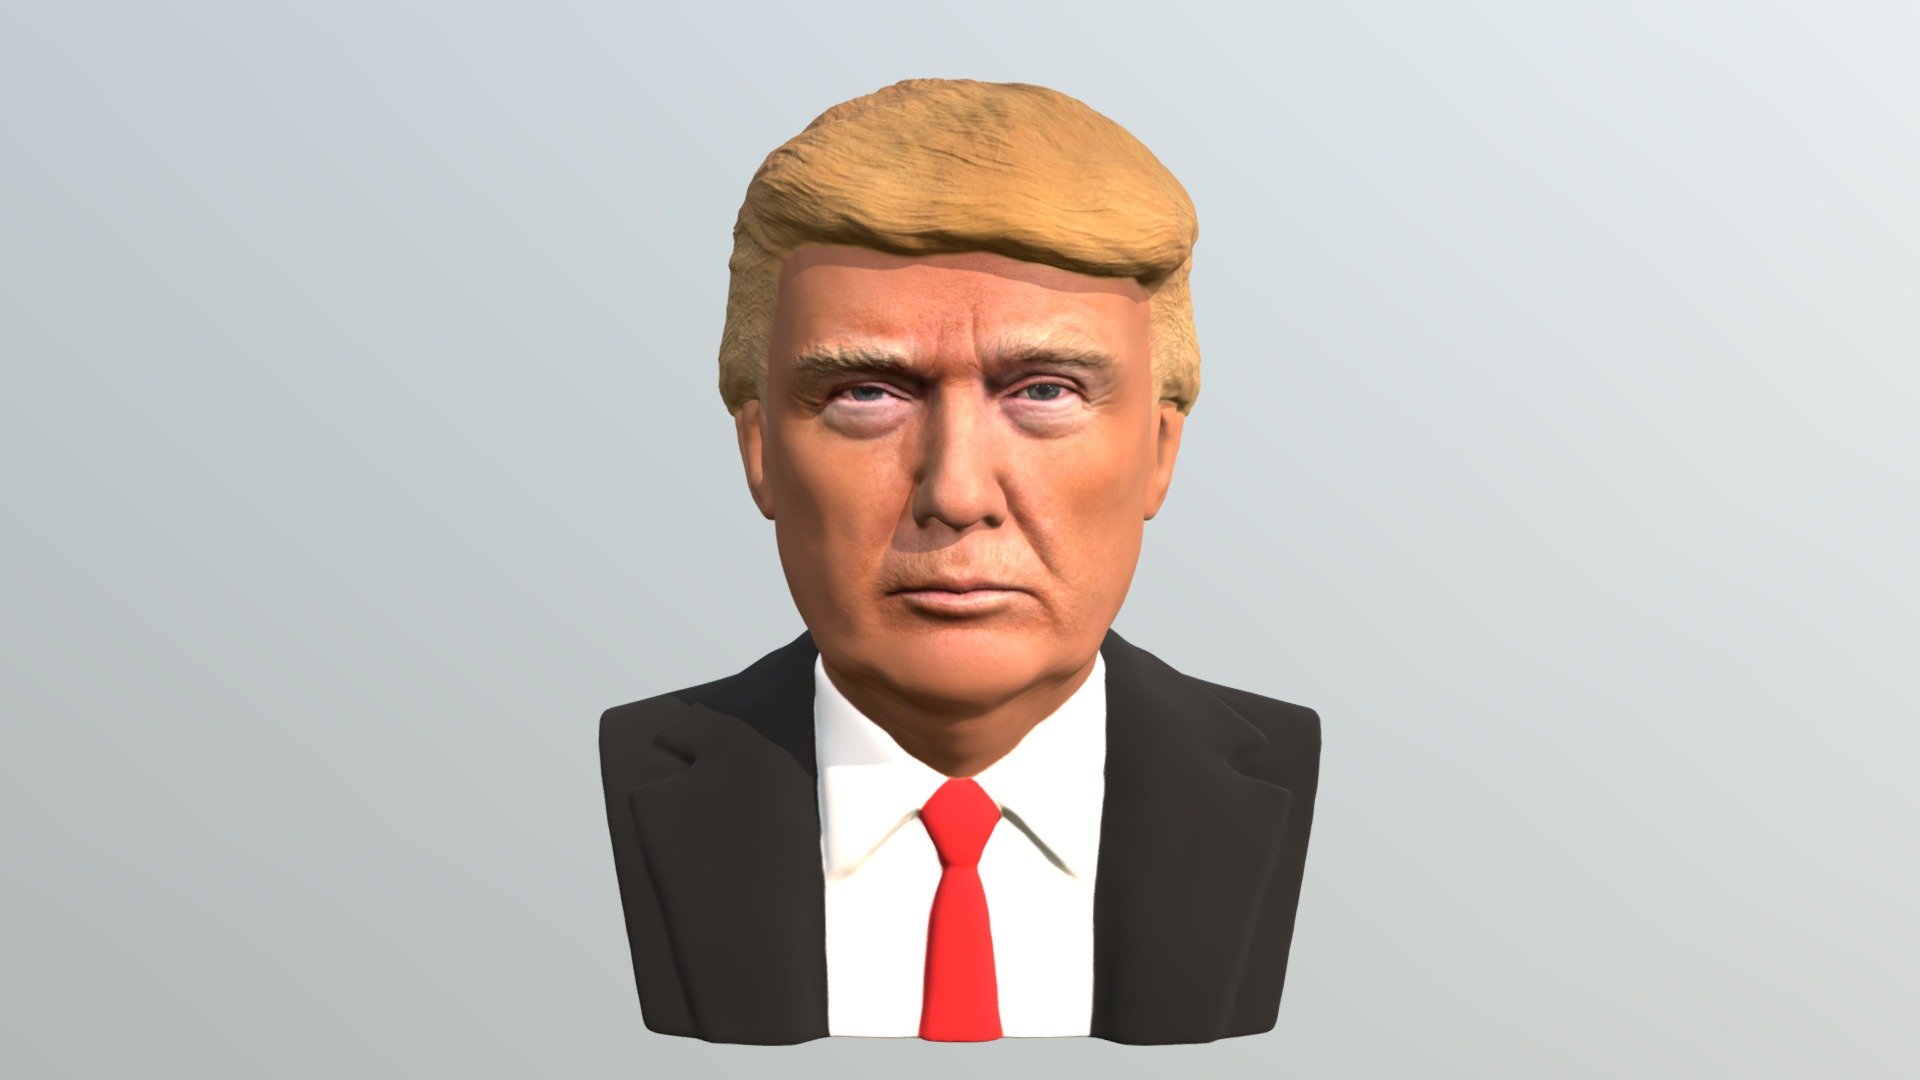 Here is President Donald Trump bust 3D model ready for full color 3D printing. The model current size is 5 cm height, but you are free to scale it. 
Zip file contains obj texture in png. 
The model was created in ZBrush, Mudbox and Photoshop.

If you have any questions please don't hesitate to contact me. I will respond you ASAP. 
I encourage you to check my other celebrity 3D models 3d model